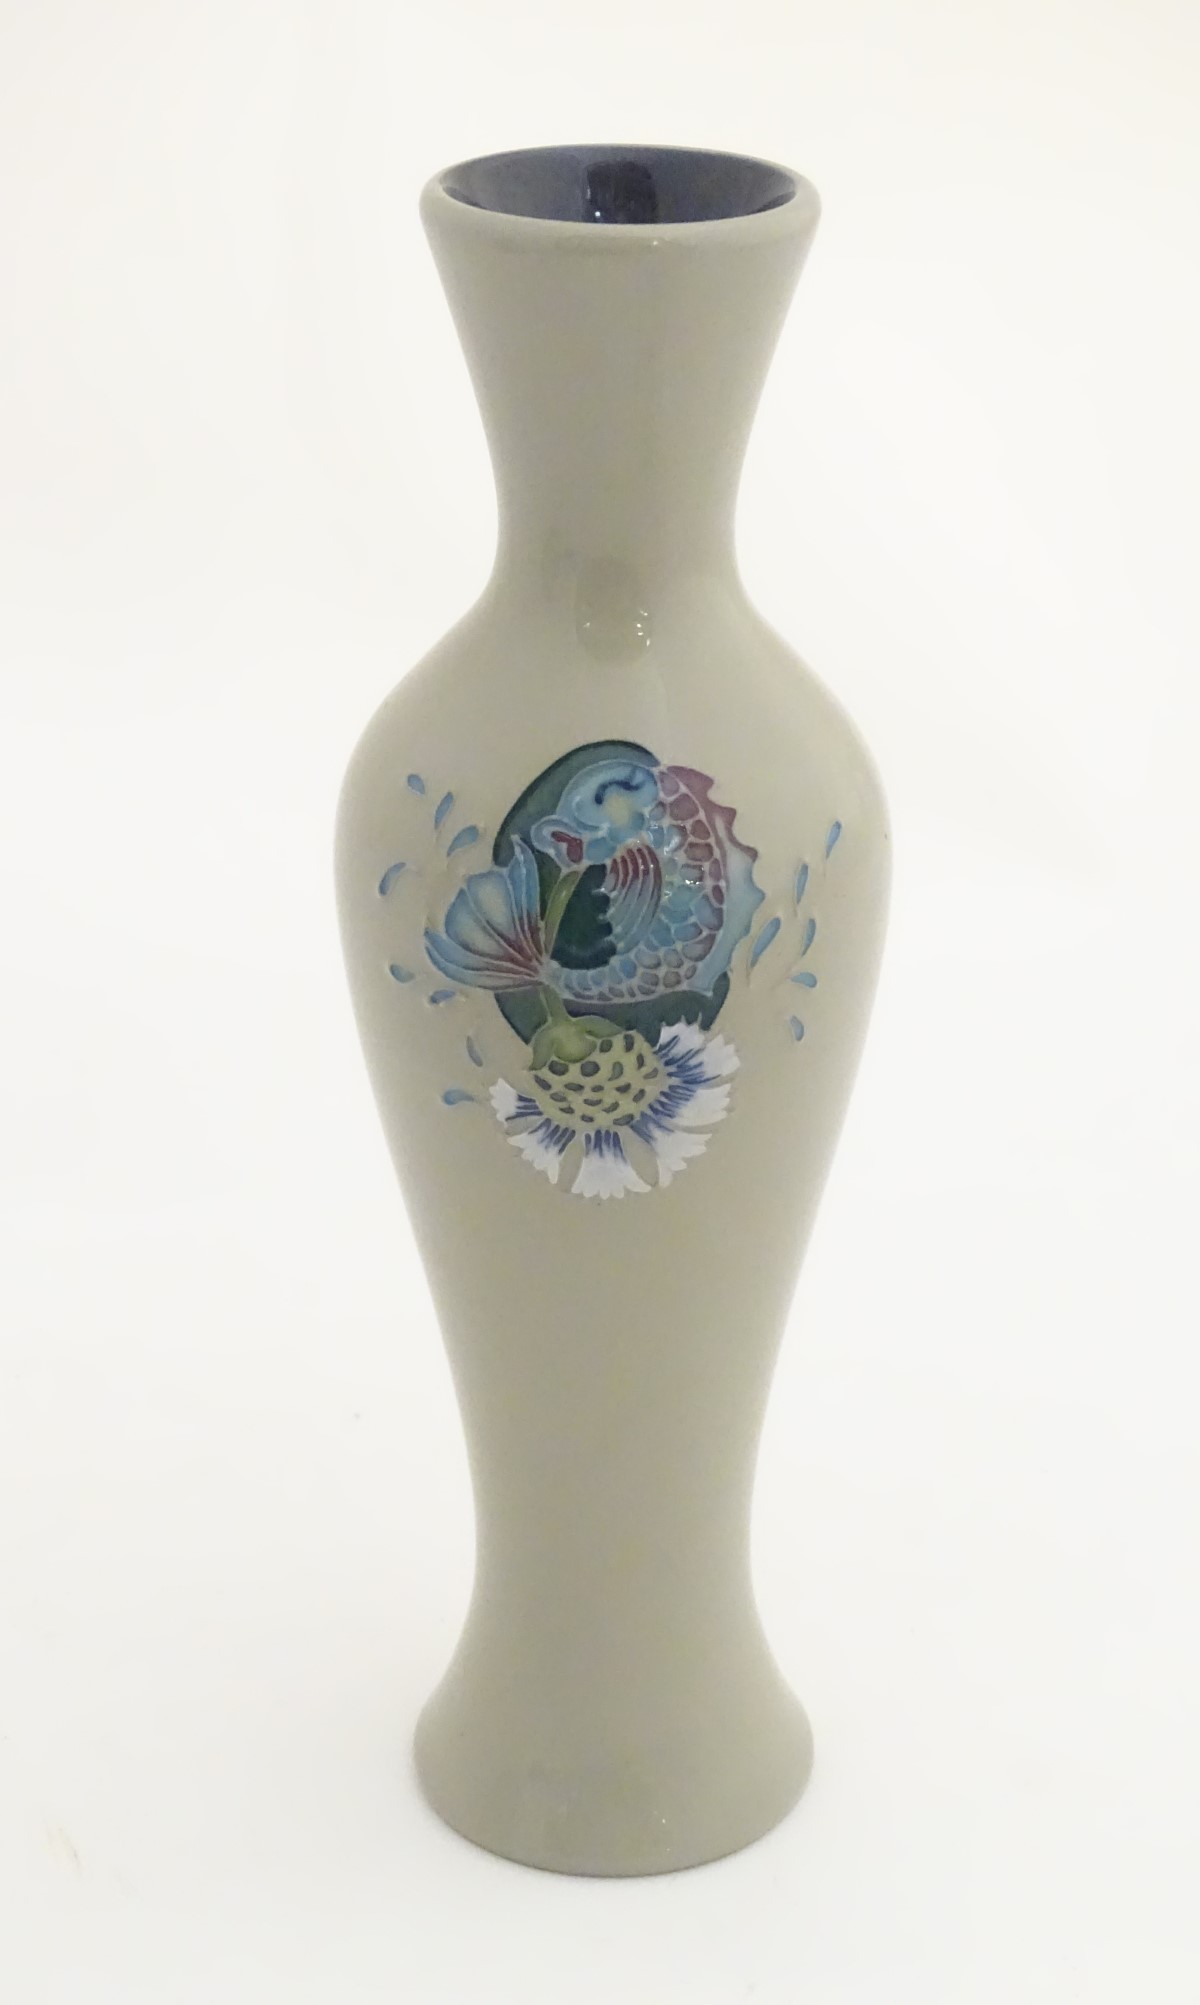 A Moorcroft vase in the shape no. 93/12 decorated with a fish and thistle design. - Image 3 of 8